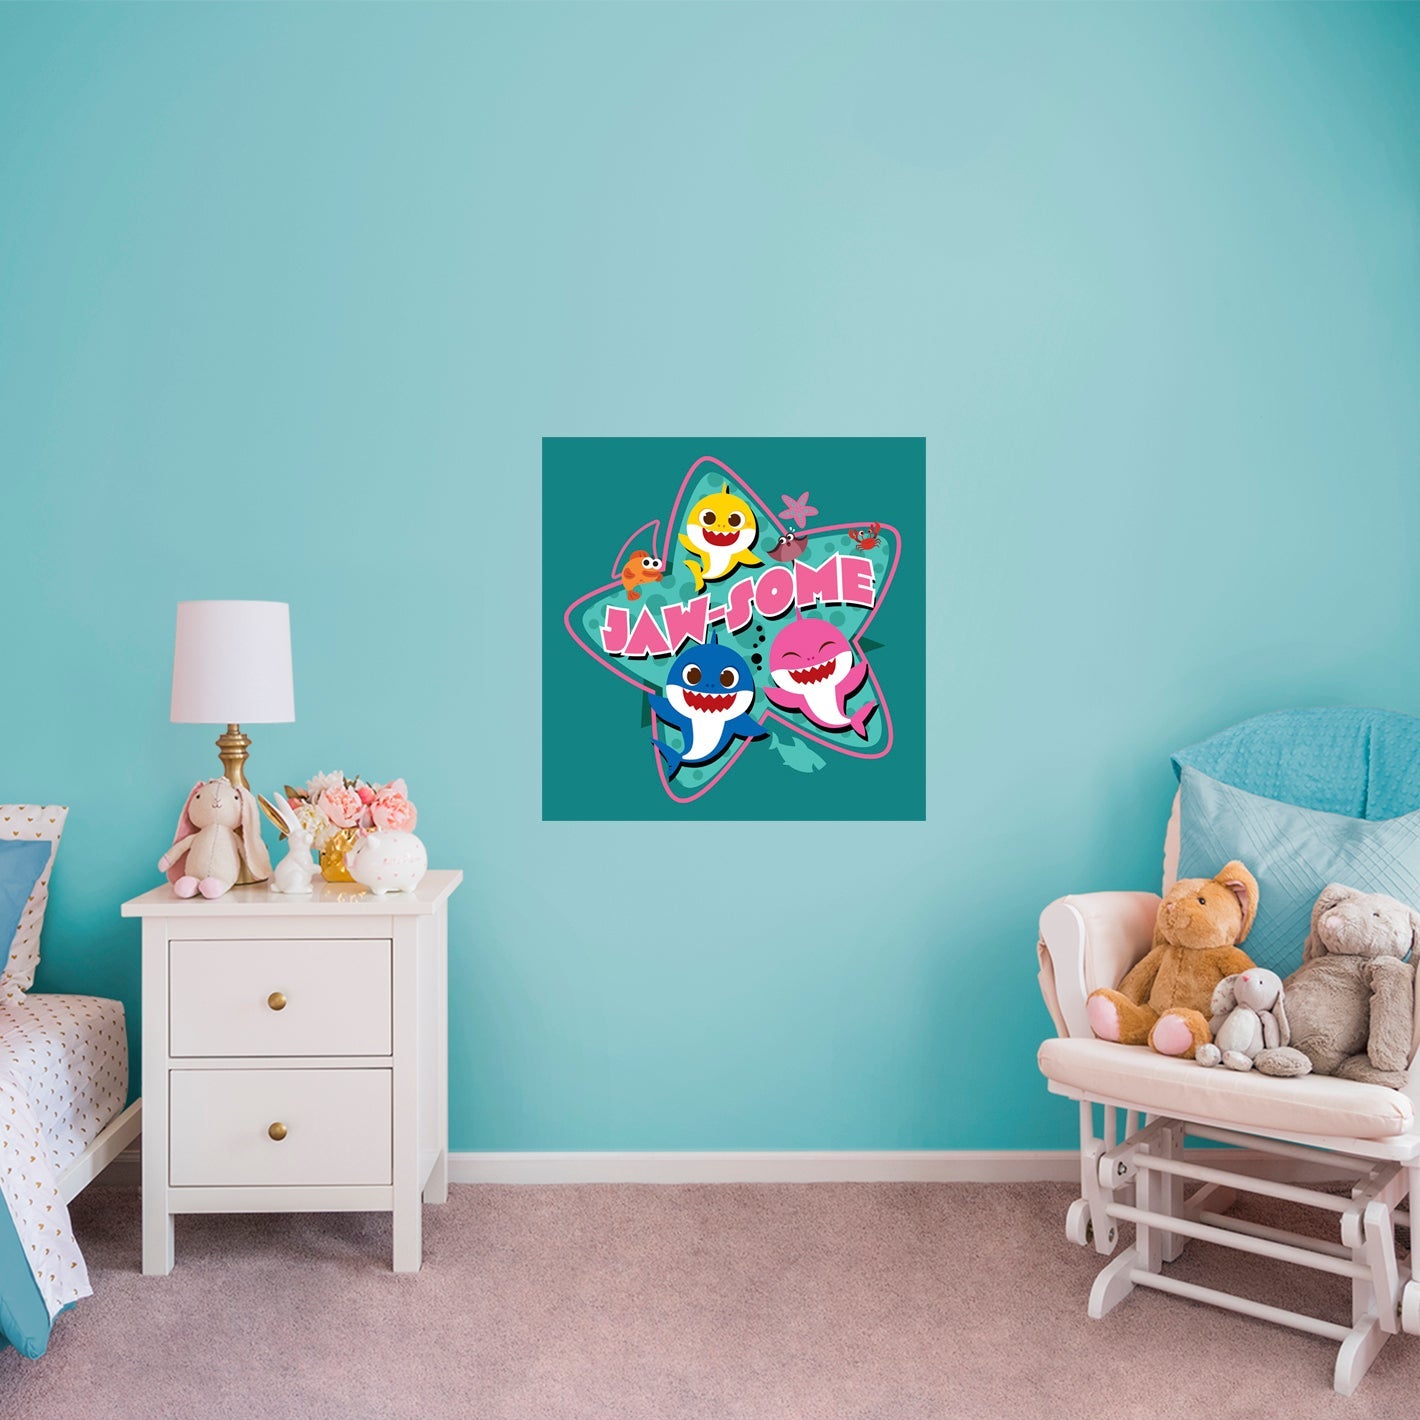 Baby Shark: Happy Friends Poster - Officially Licensed Nickelodeon Removable Adhesive Decal